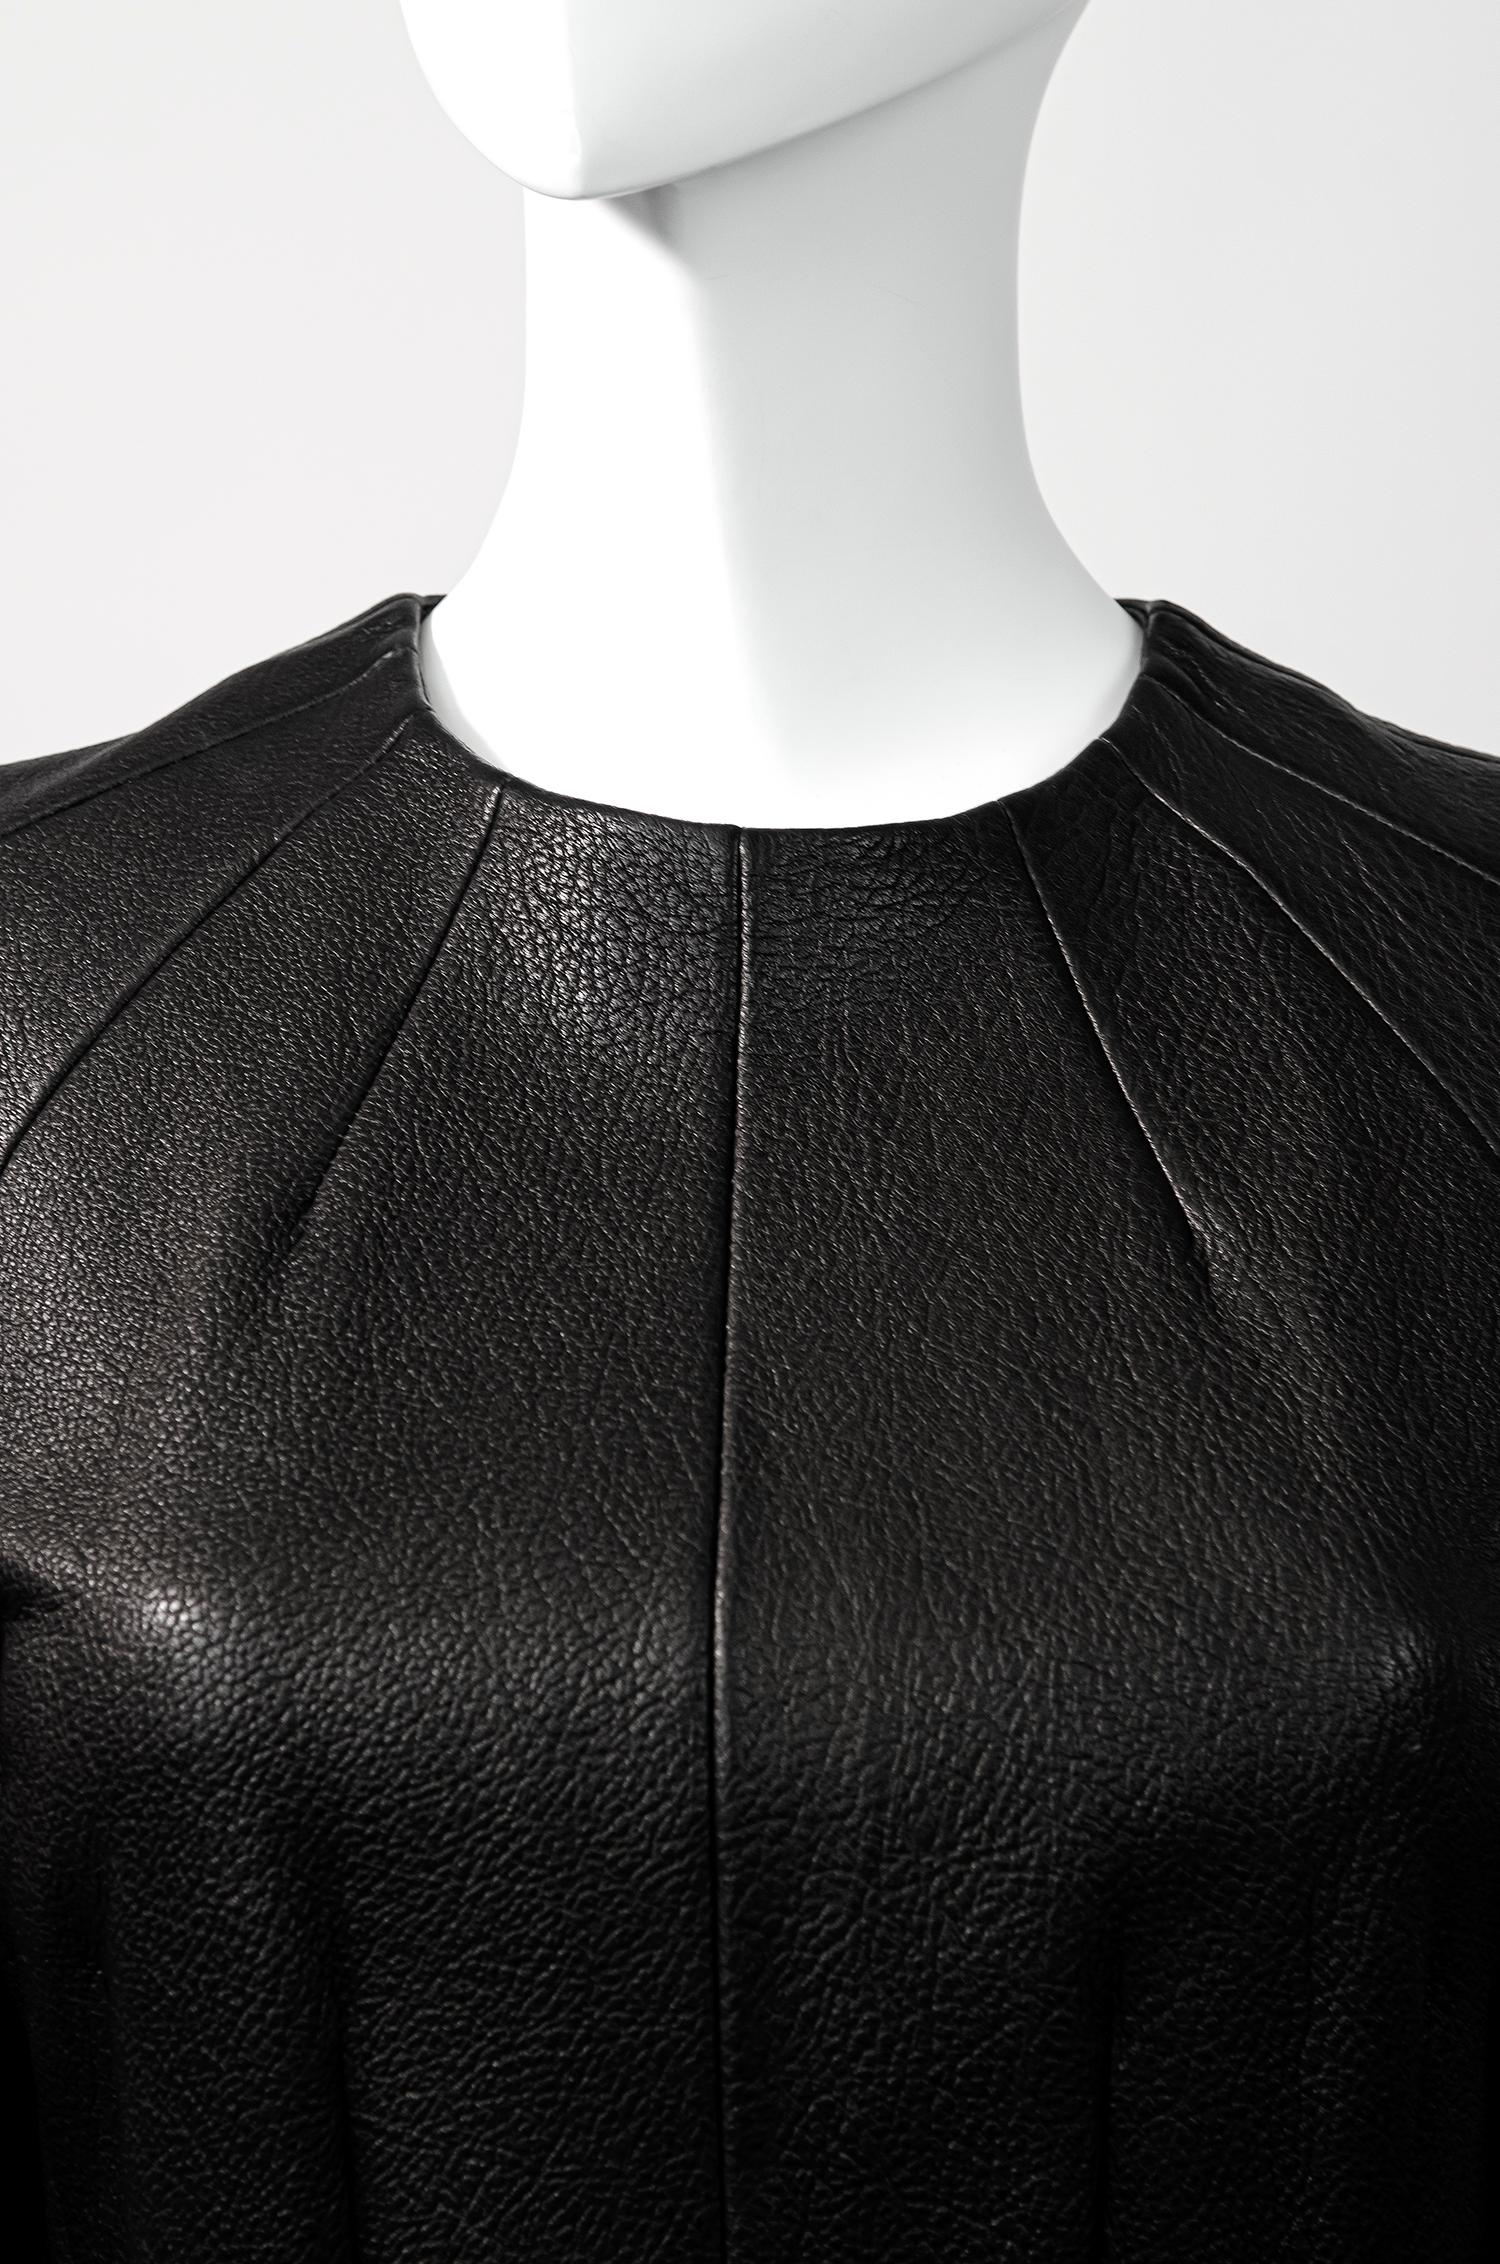 ALEXANDER MCQUEEN Textured Leather Bubble Dress For Sale 2